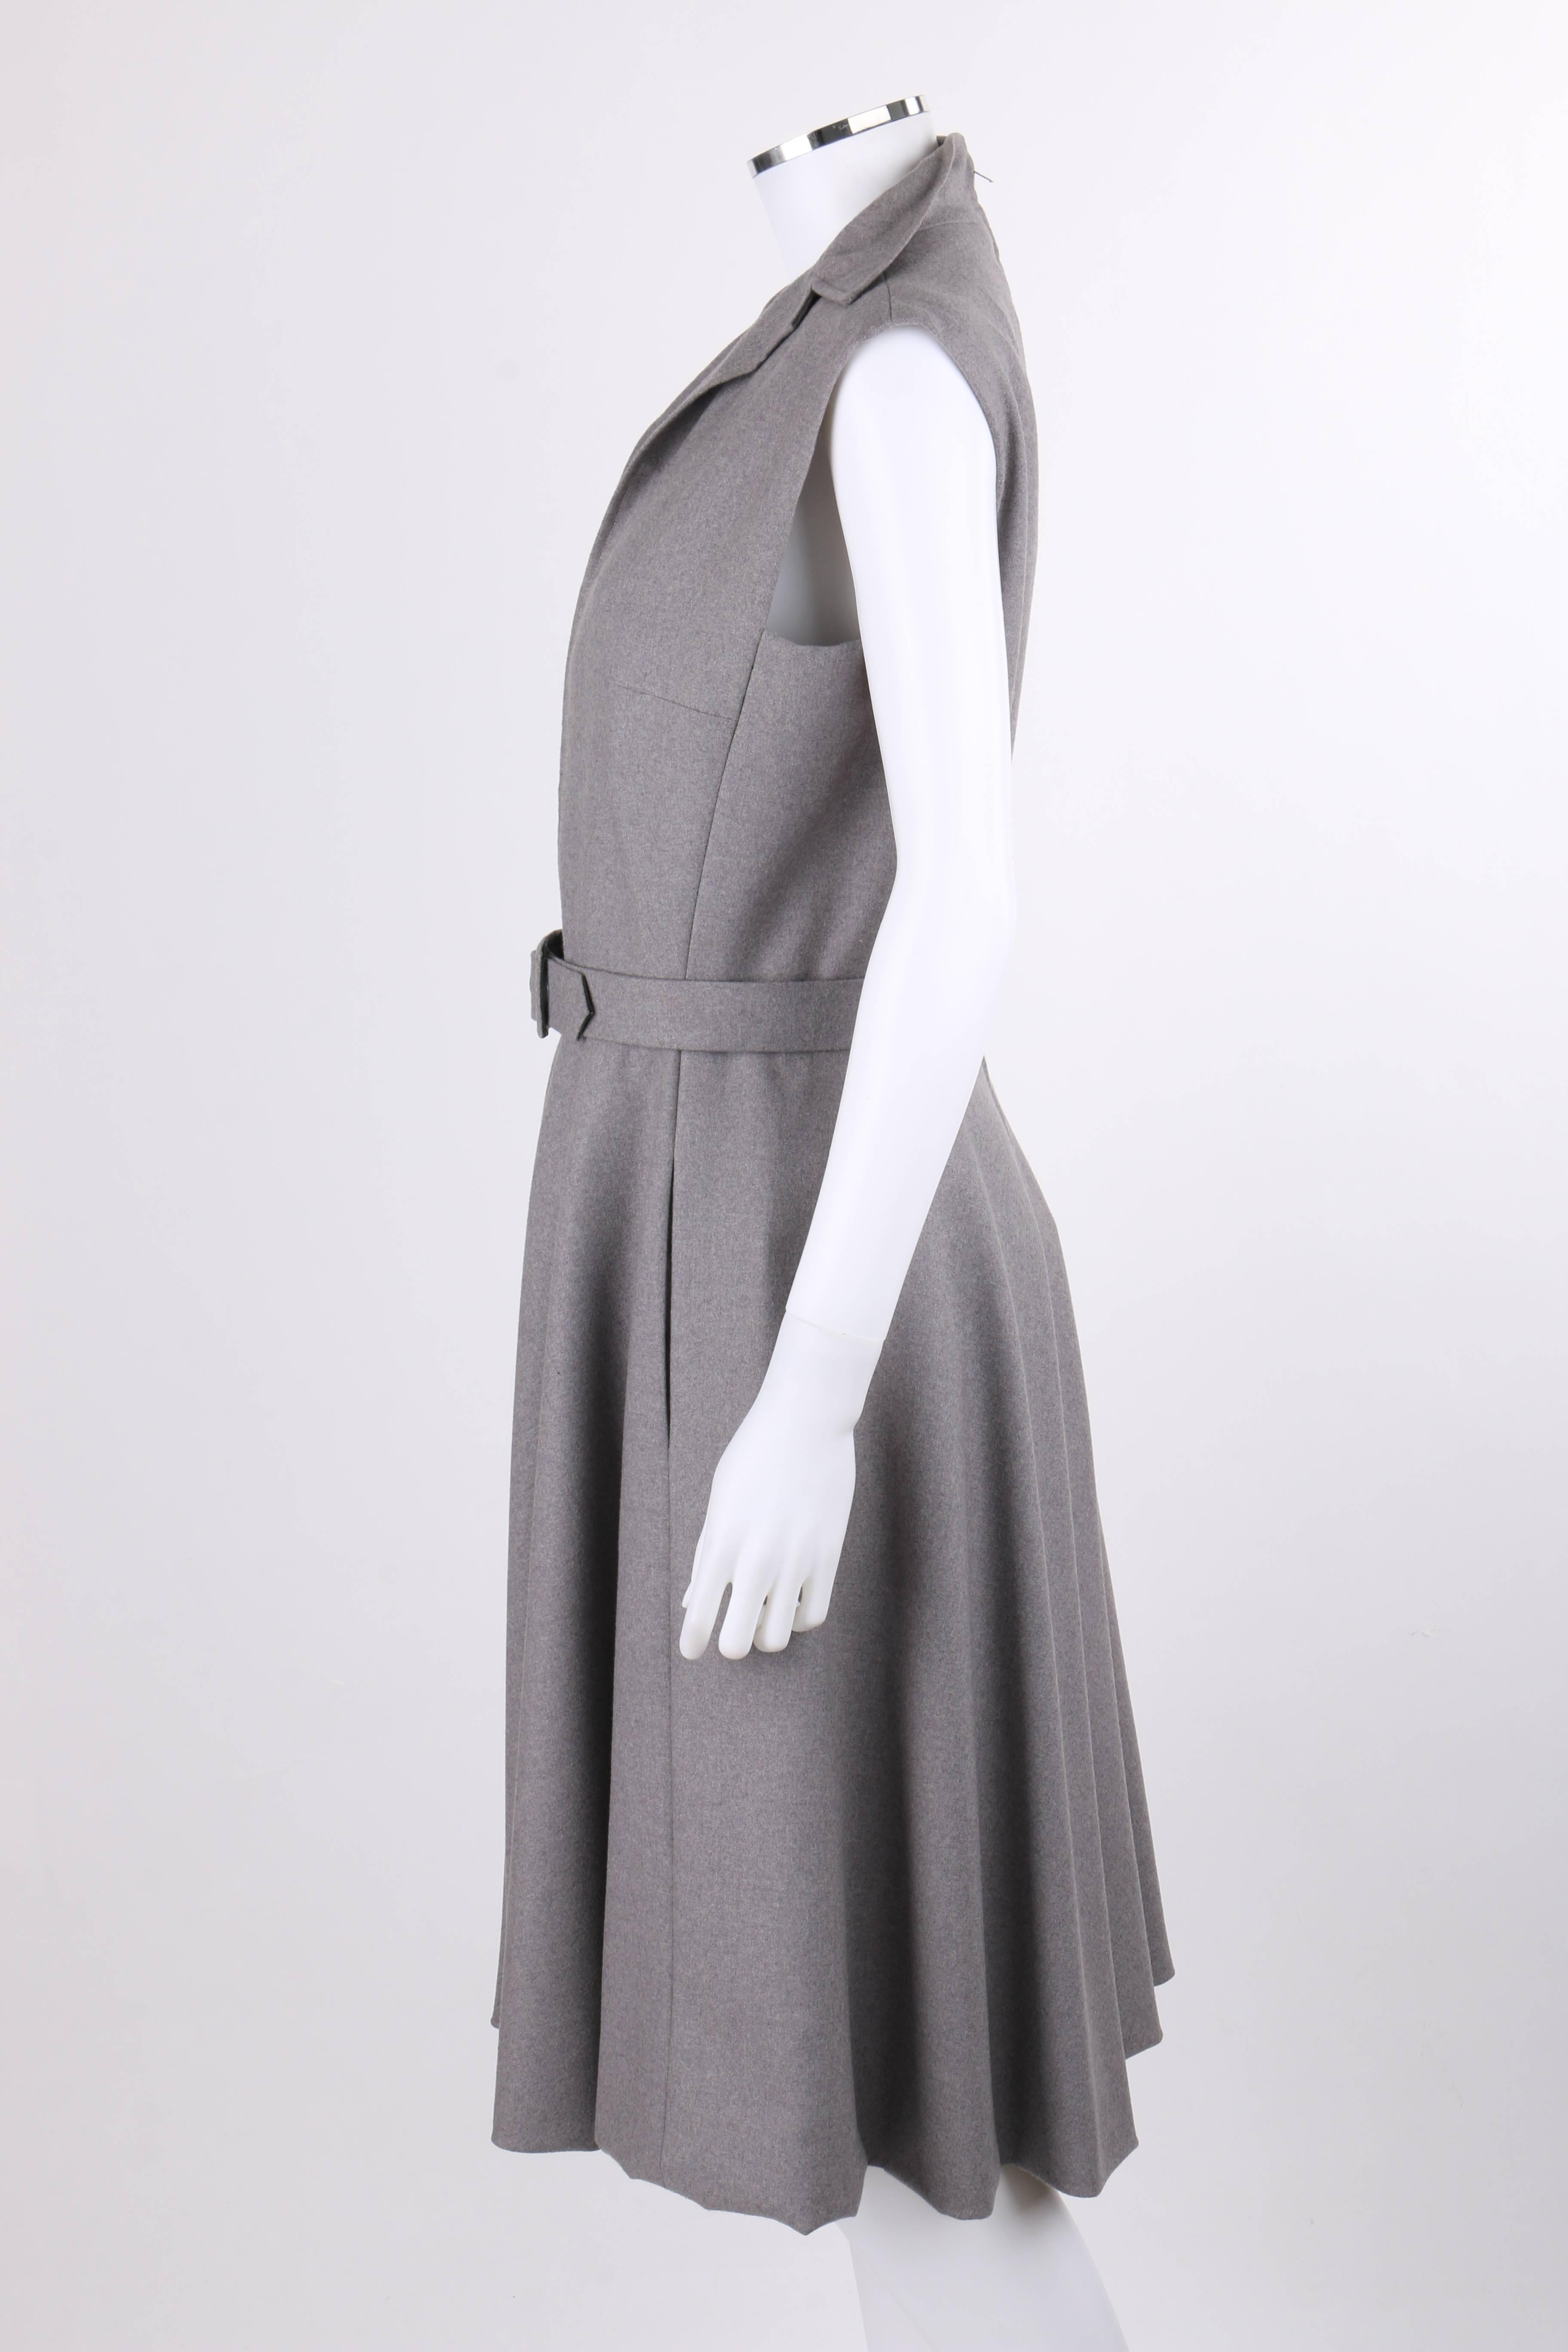 PAULINE TRIGERE c.1980's Gray Wool Extended Shoulder Belted Day Dress 1